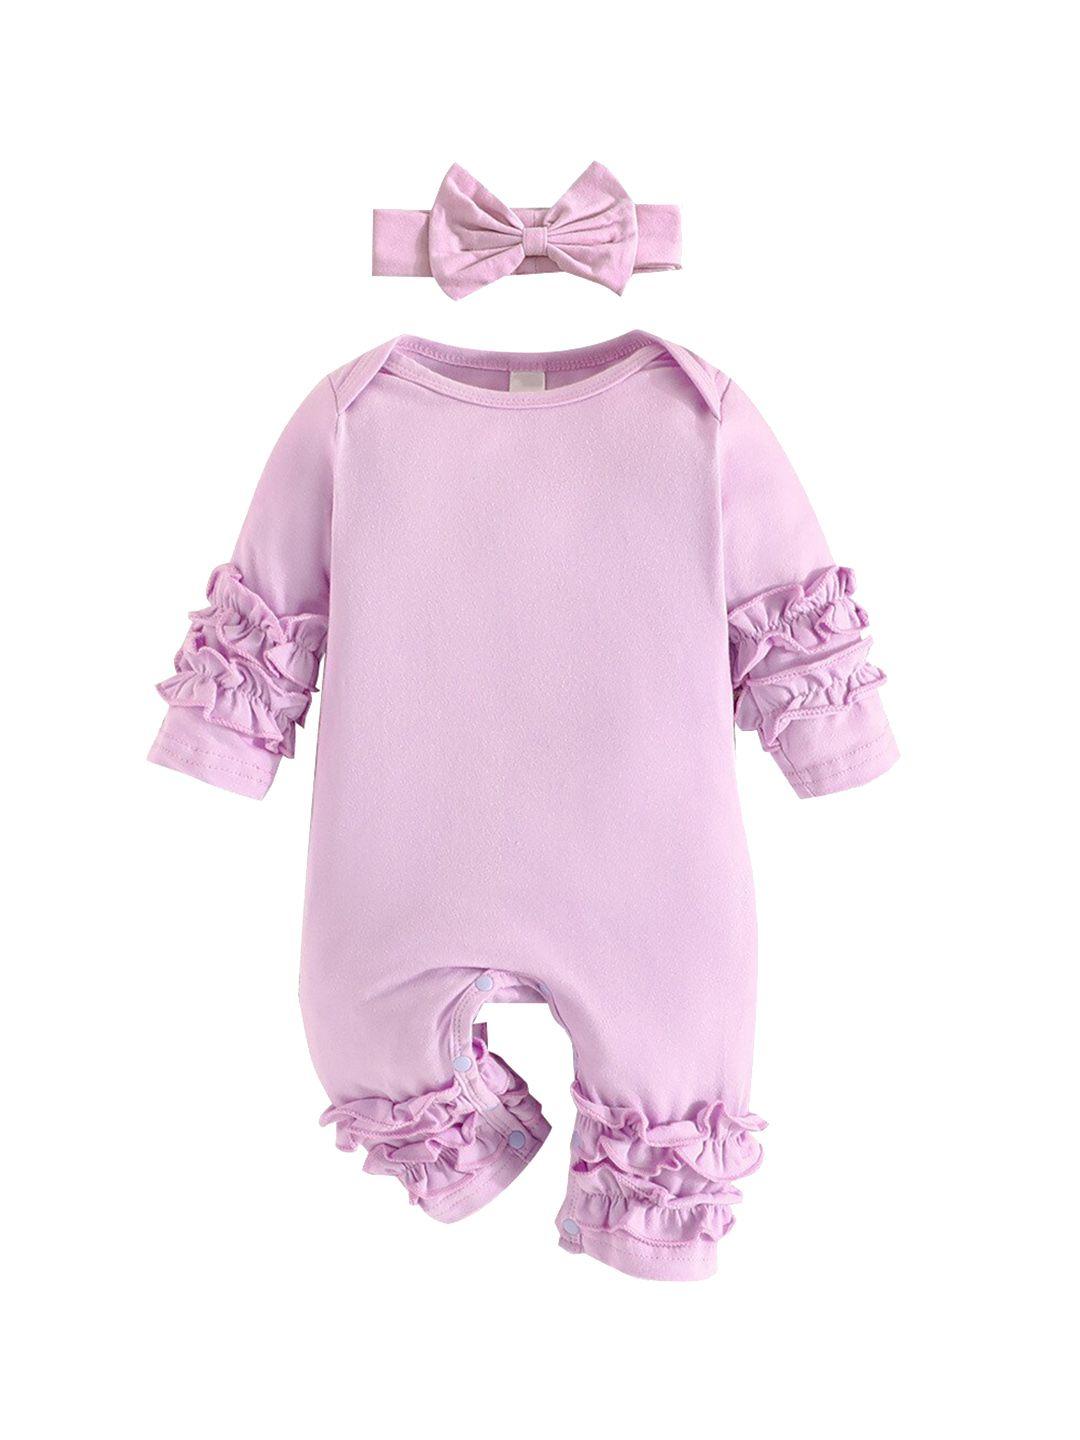 stylecast-infant-girls-purple-cotton-rompers-with-bow